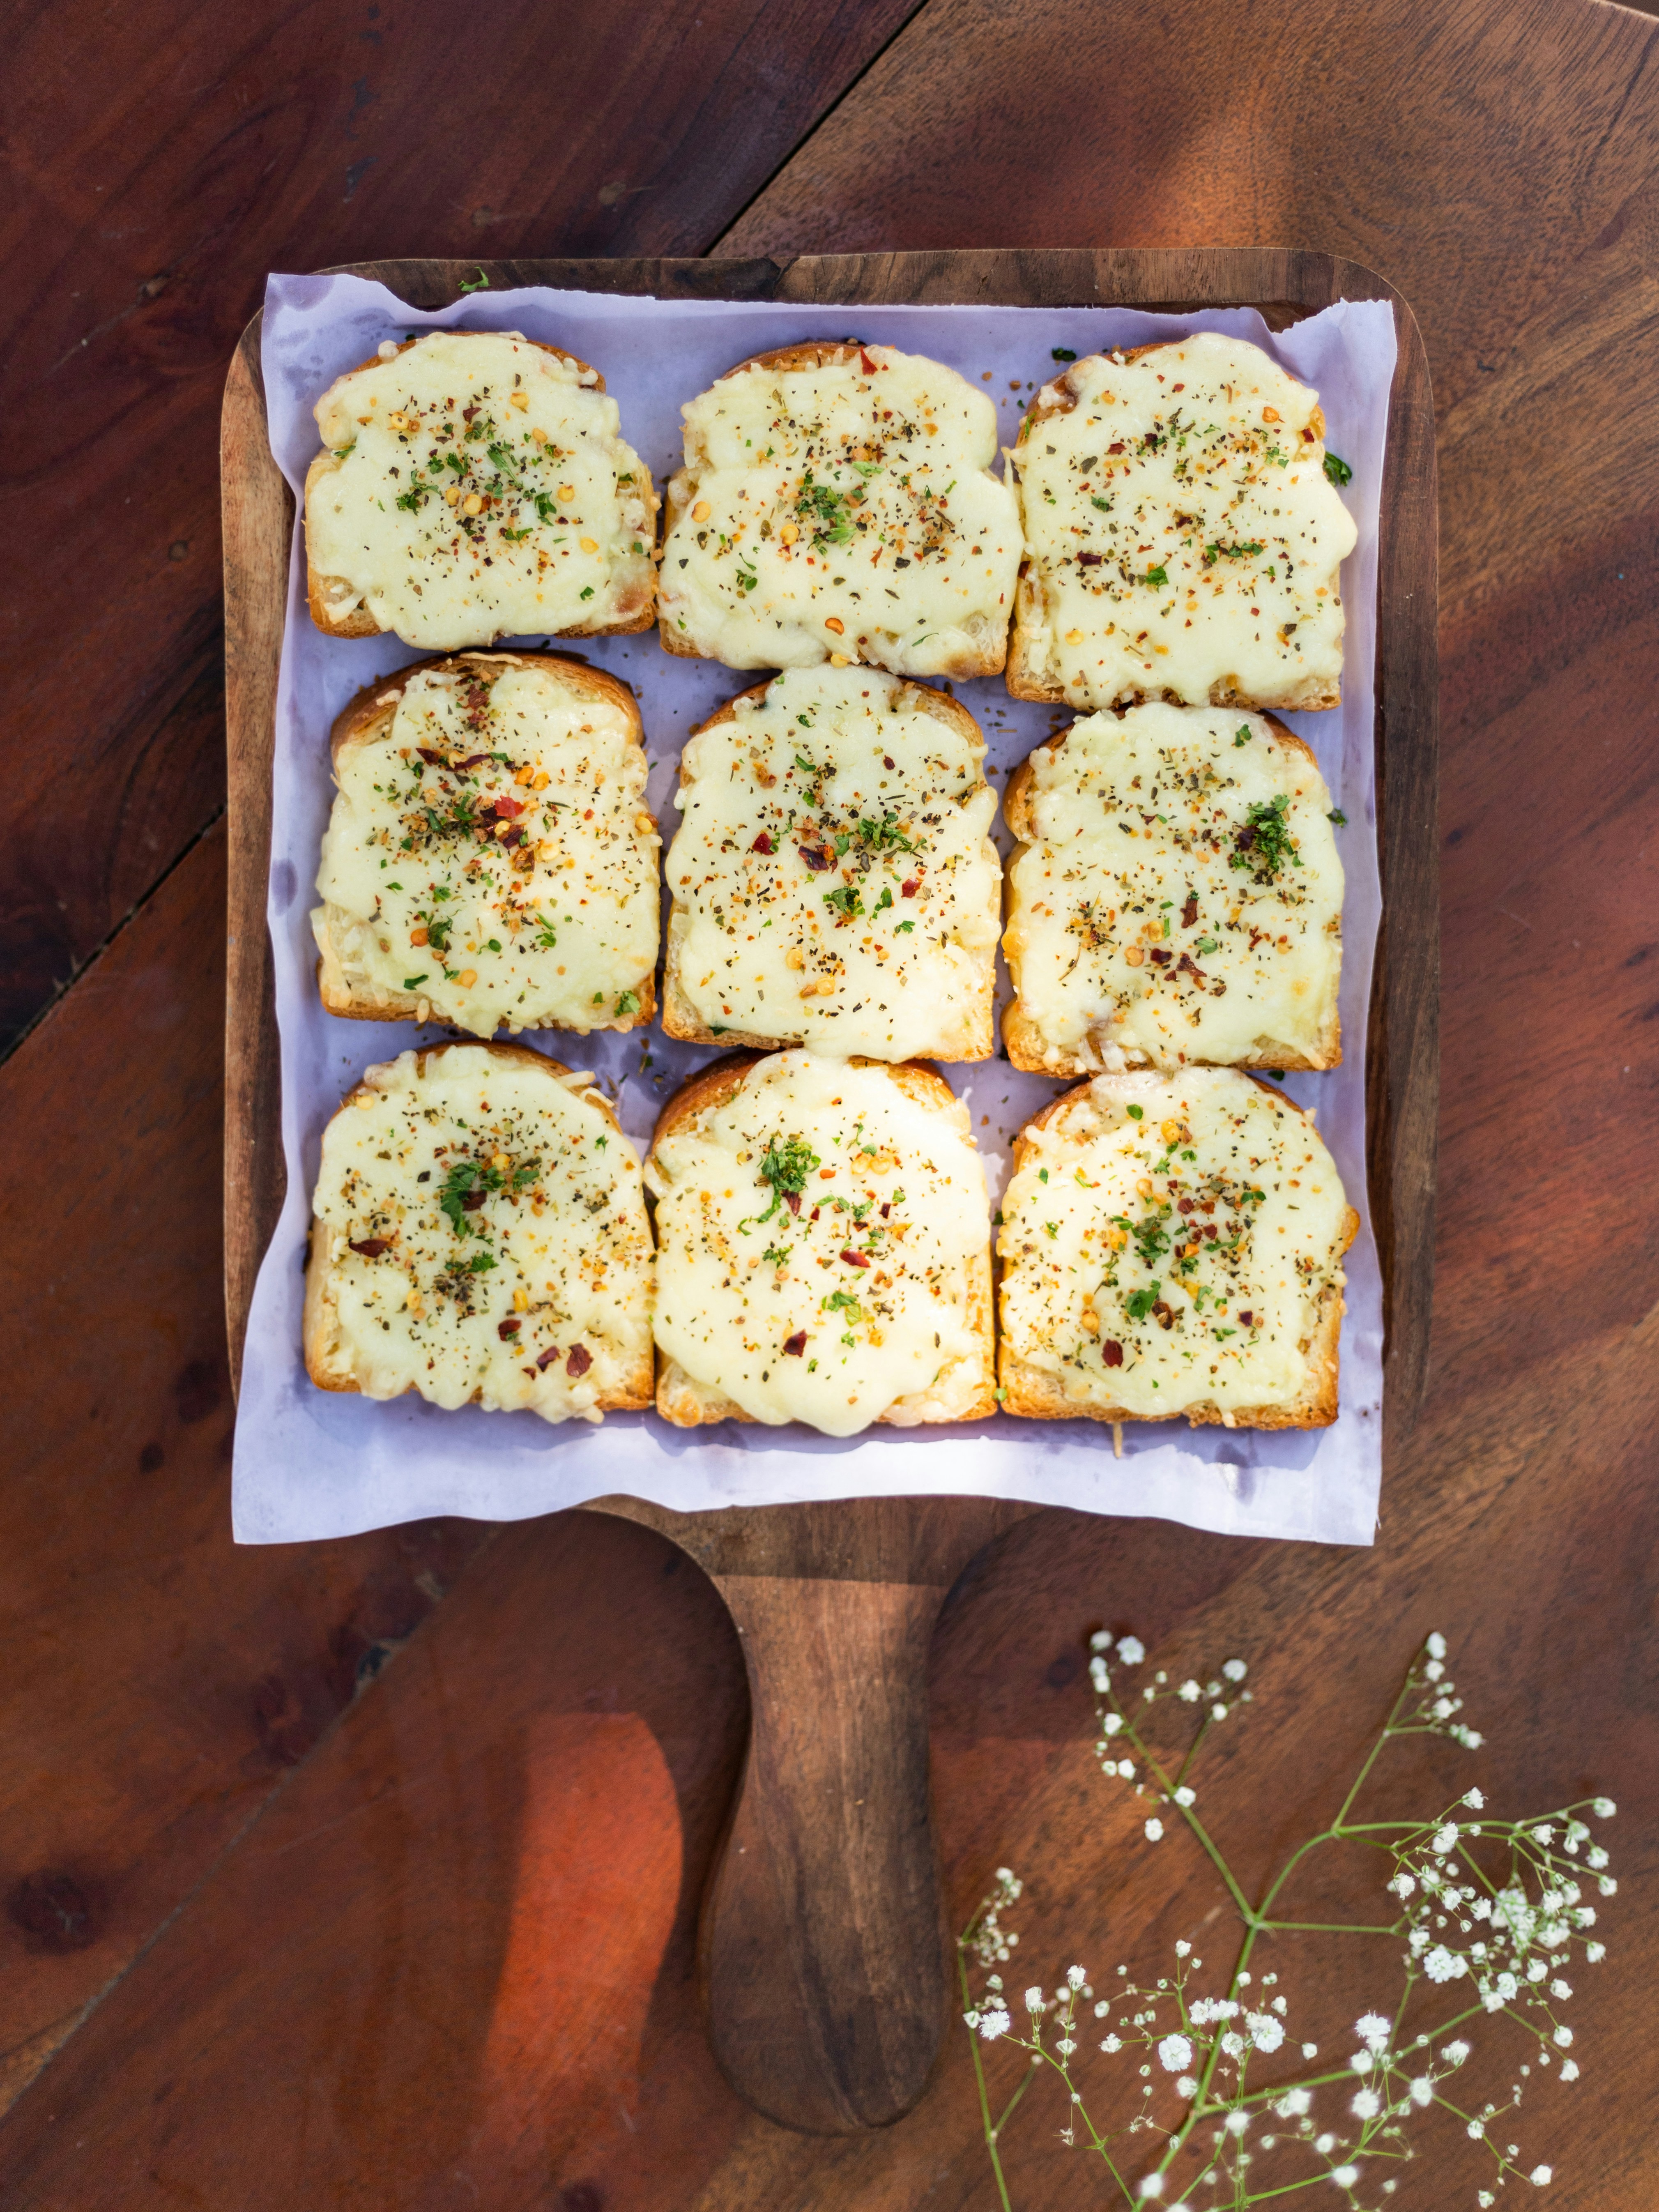 Step-by-Step Instructions for Making Air Fryer Texas Toast Garlic Bread